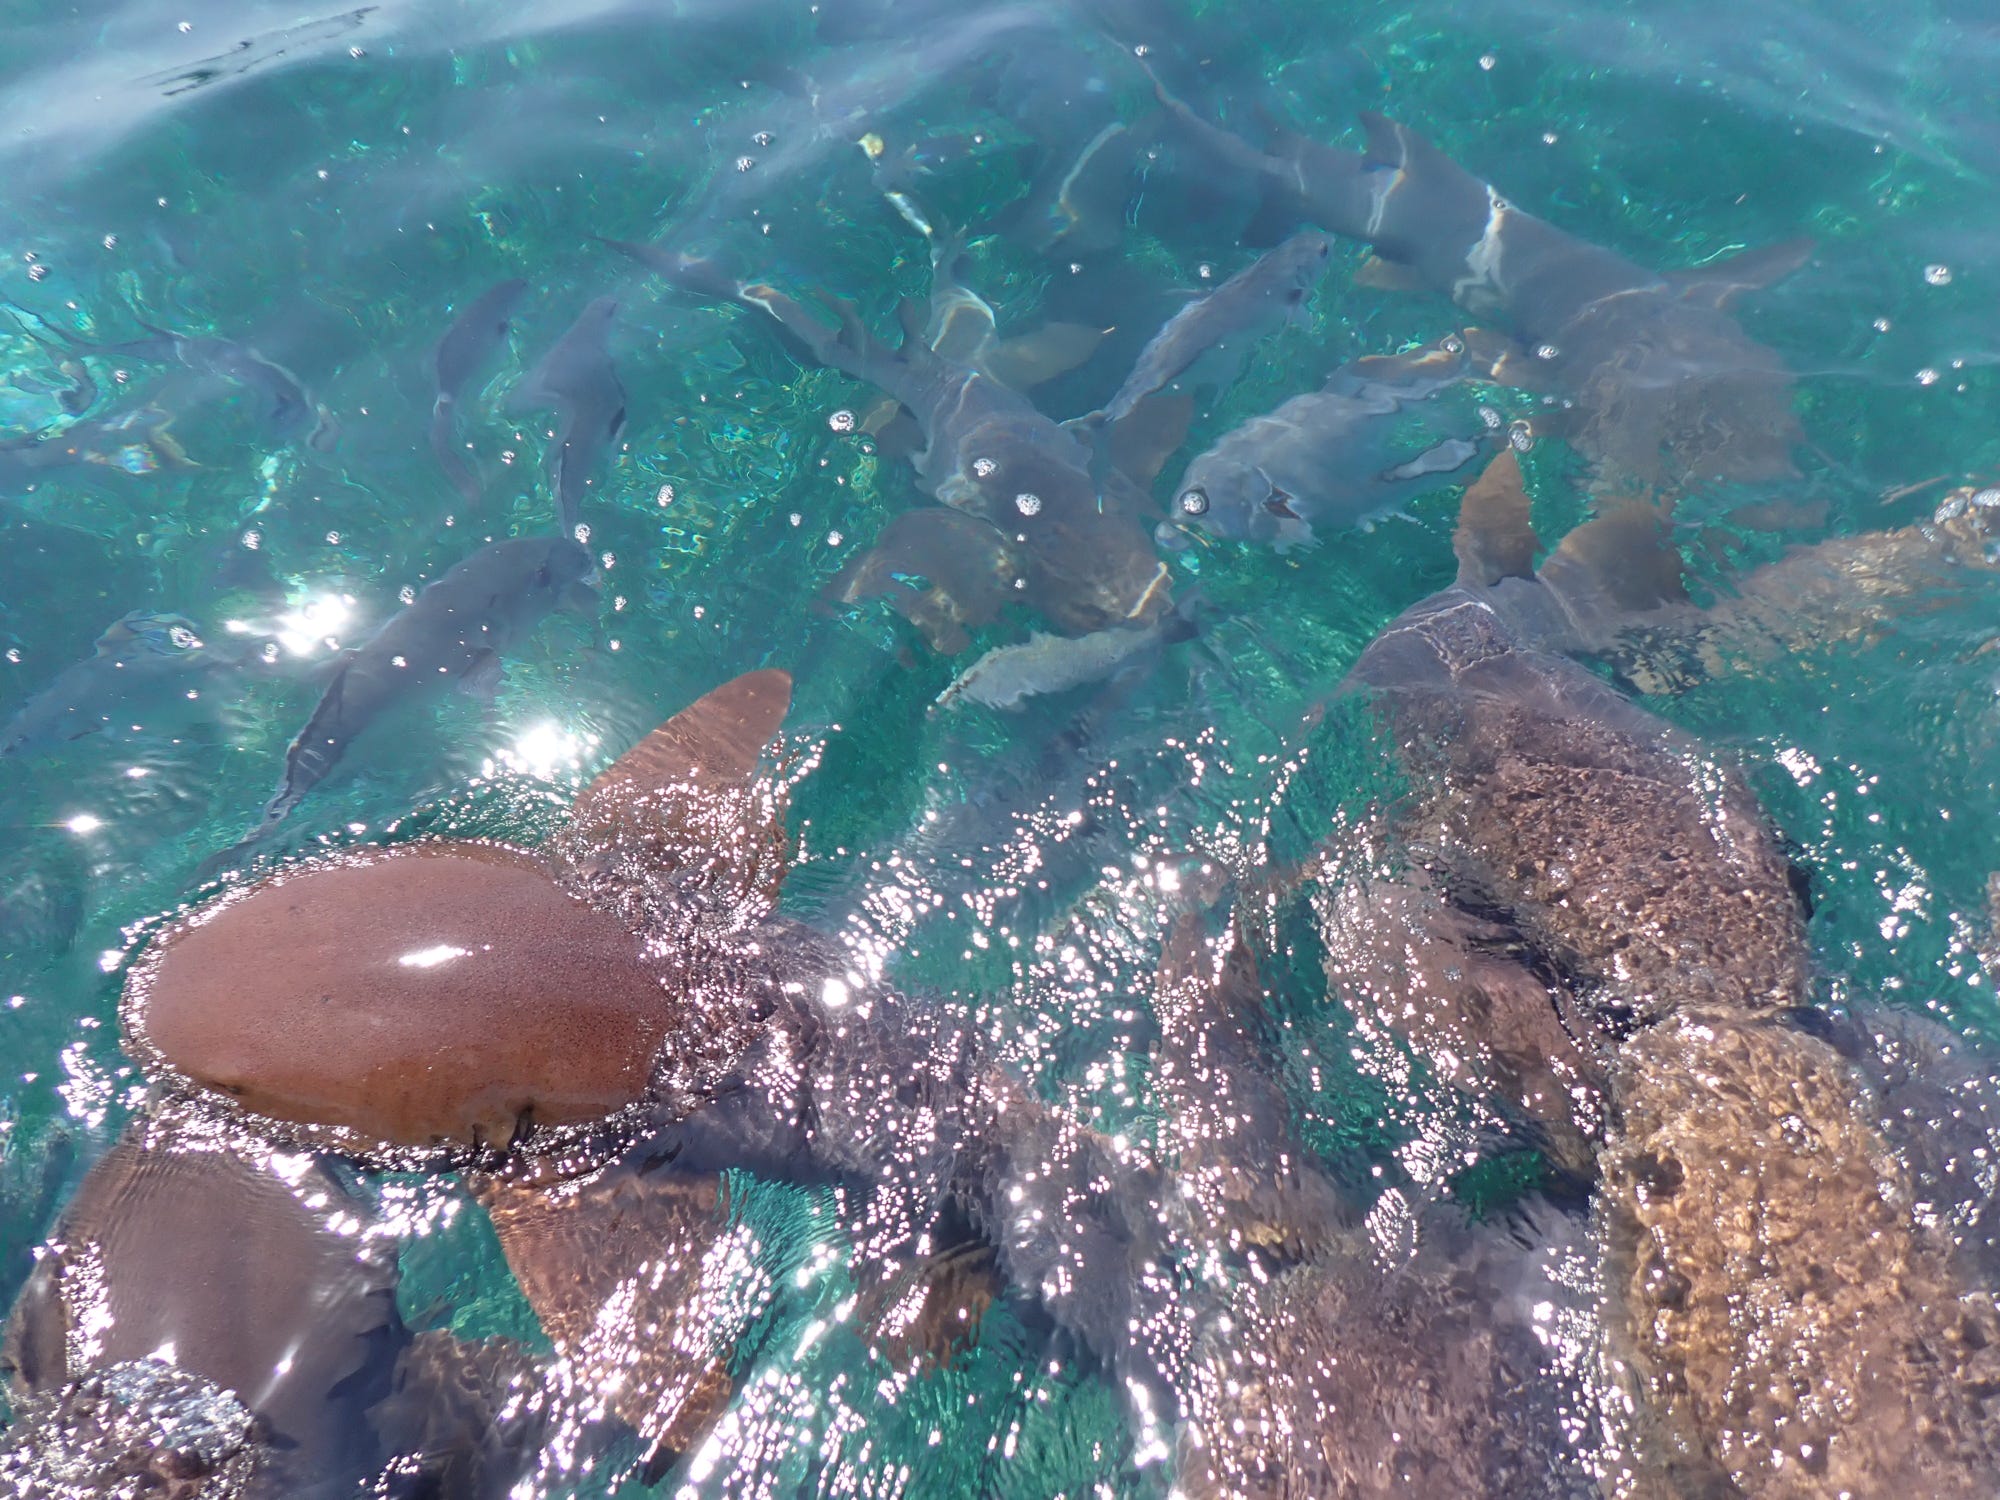 Nurse sharks surrounding our boat! So cool! 